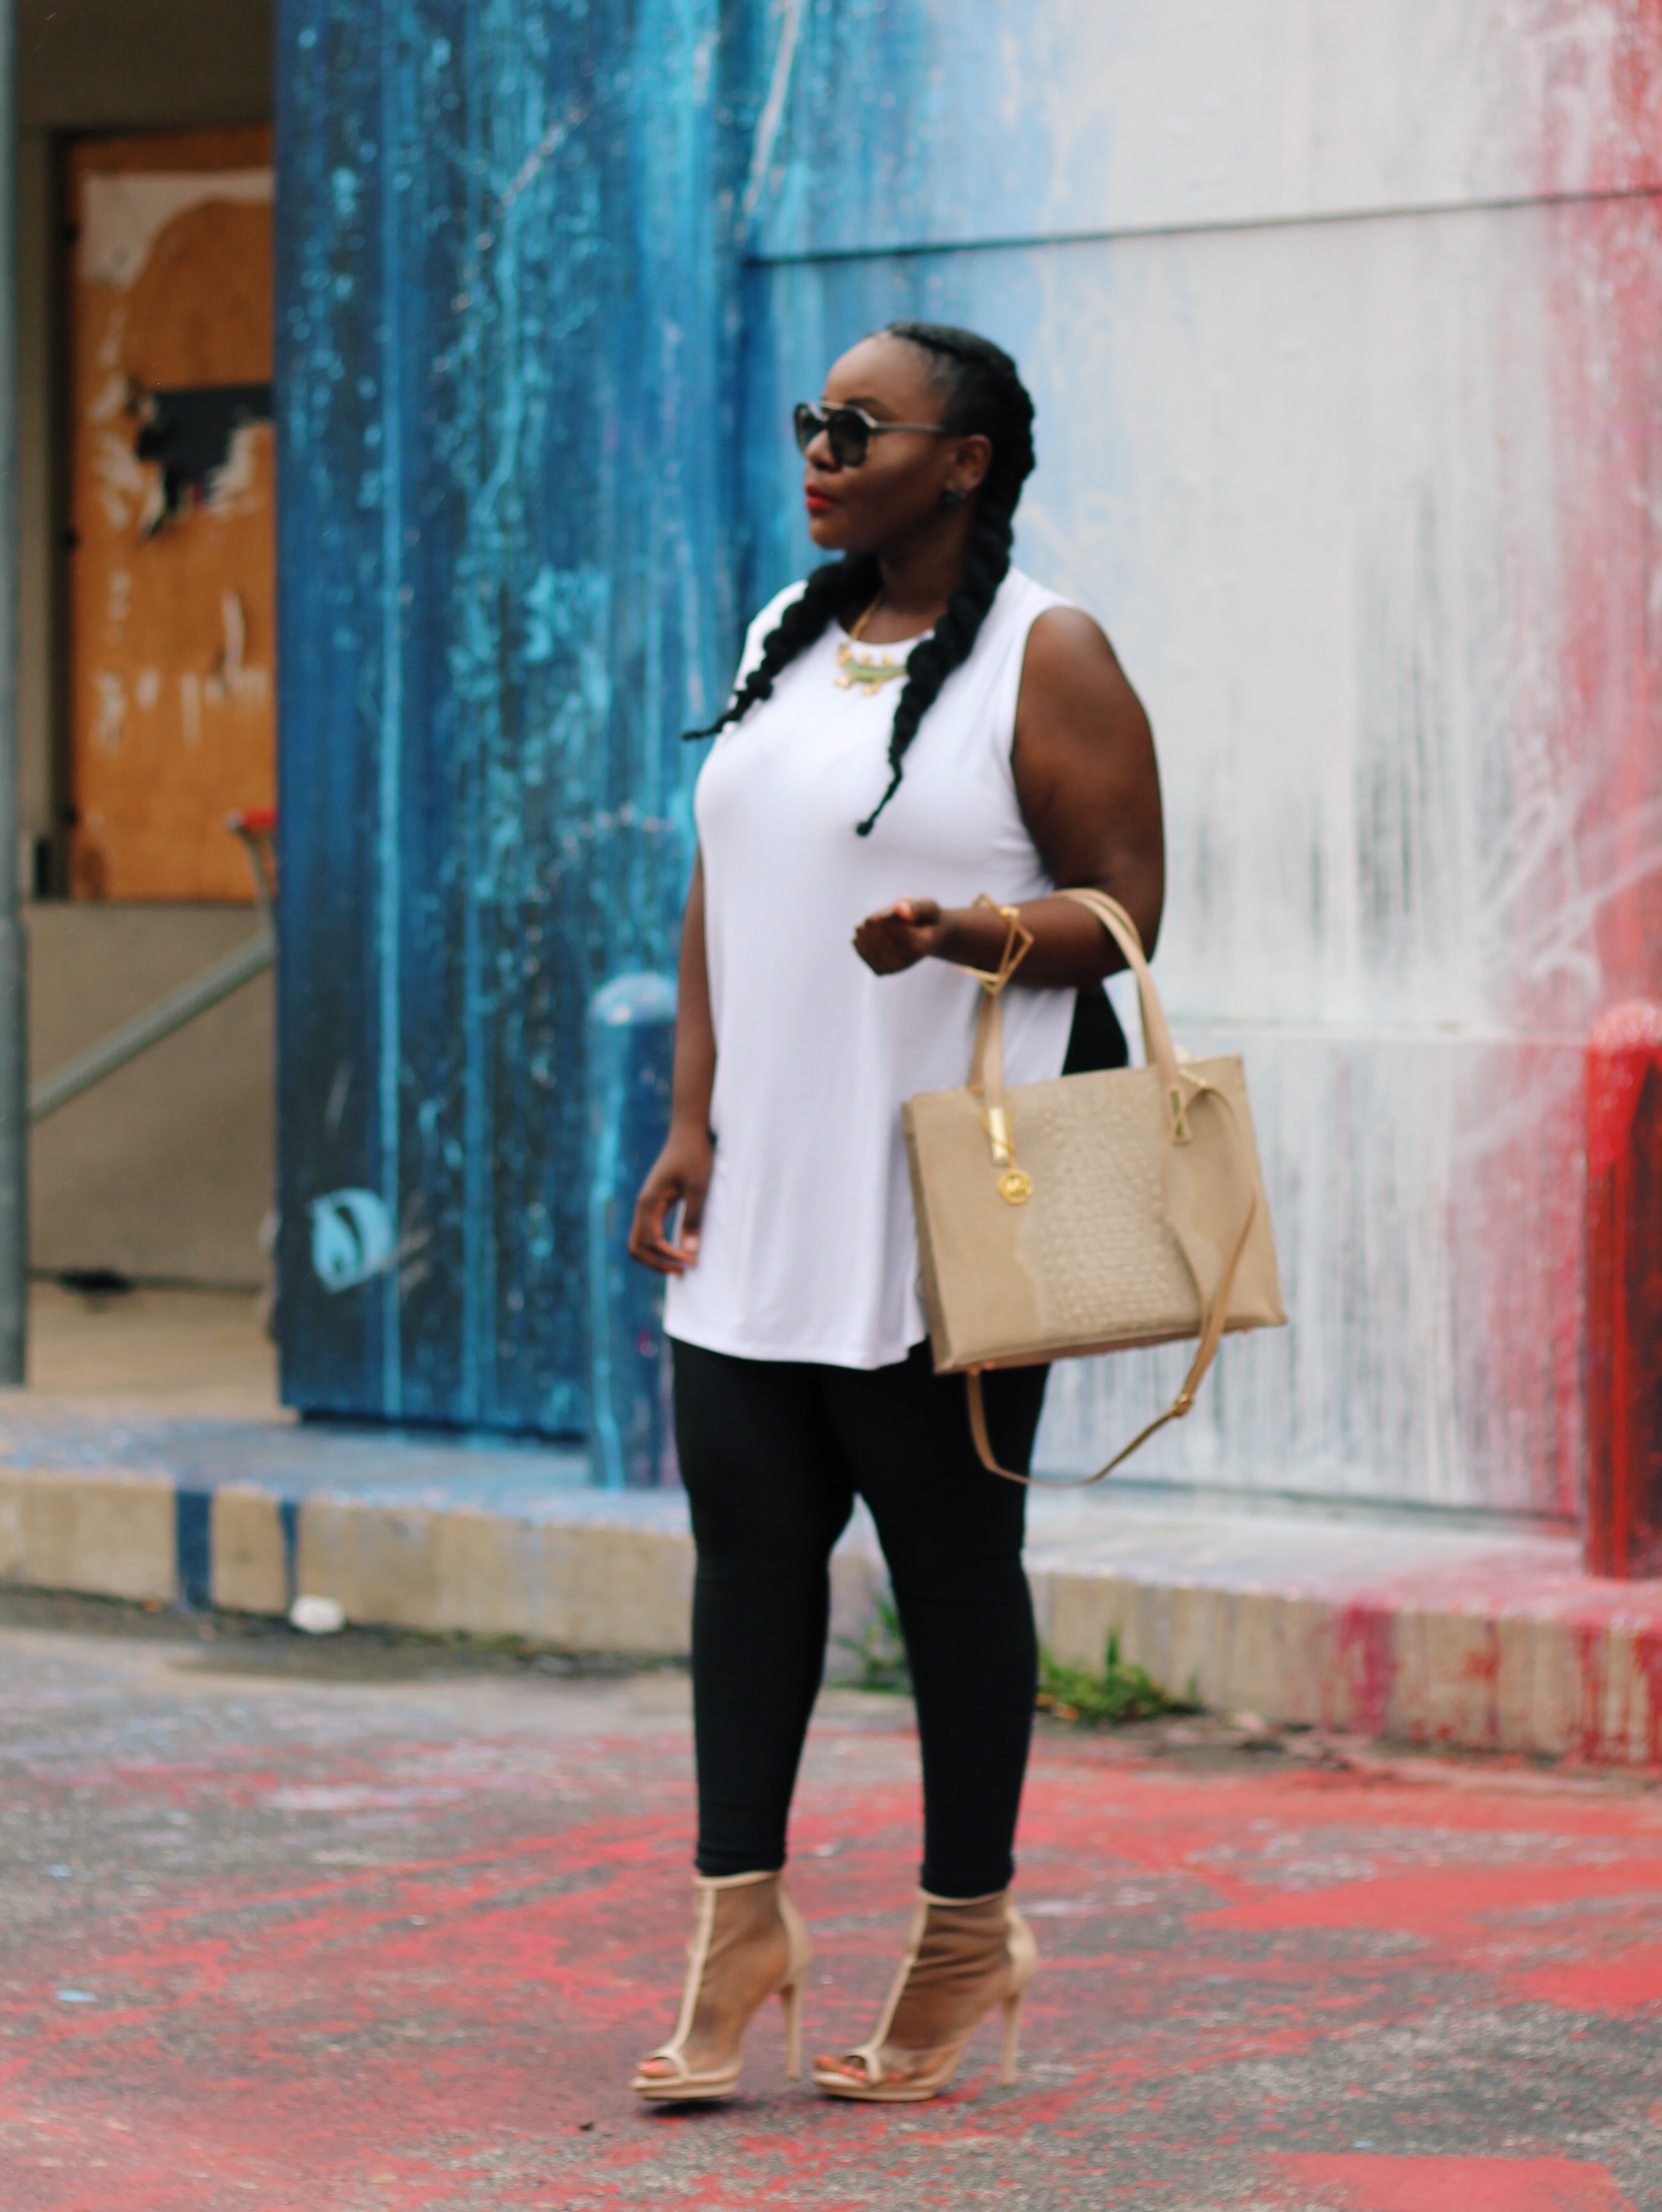 asos curve bloggers, beautiful curvy girls, curvy style dark skin fashion blogger curvy style blogger, dark skin beauty blogger, dark skin blogger, houston blogger, inspiration for 2016, inspiring bloggers and blogs, new years resolutions, plus size blogger, quotes for 2016, relationship advice blogs, rules to live by in the new year, texas blogger, travel blogger, ugandan blogger, ugandan fashionista, ugandan style blogger